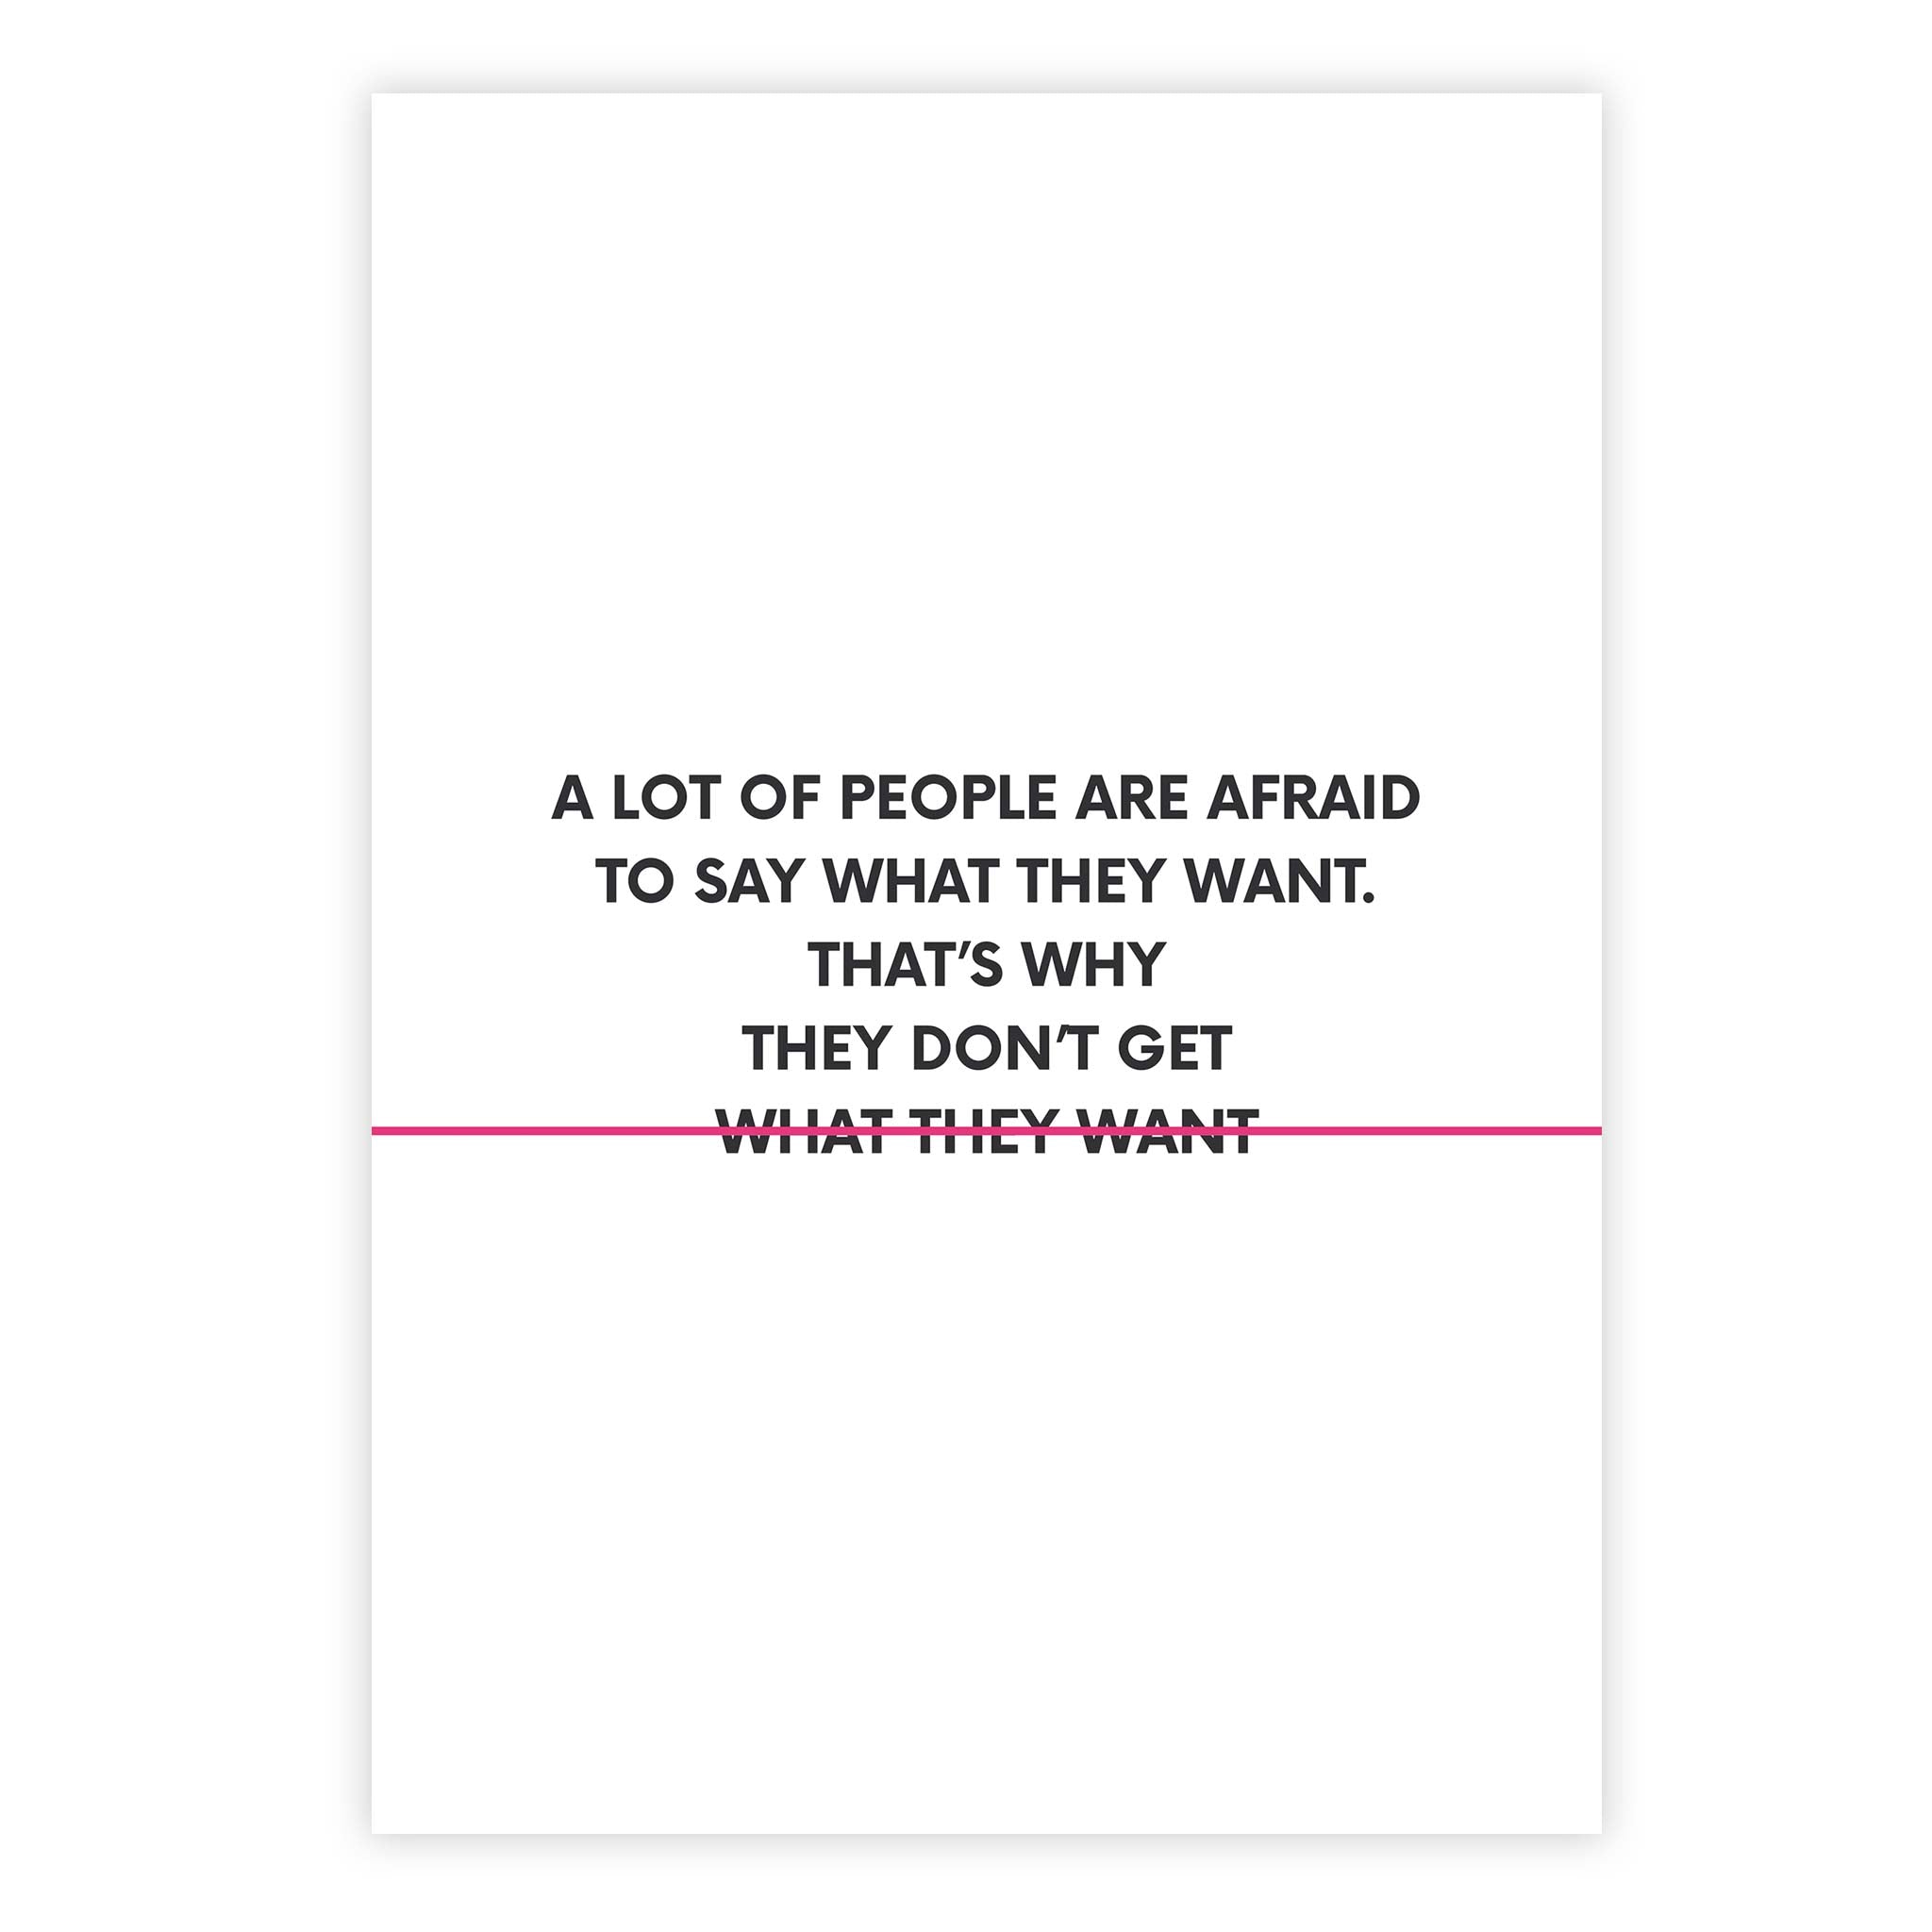 A lot of people are afraid to say what they want. That’s why they don’t get what they want